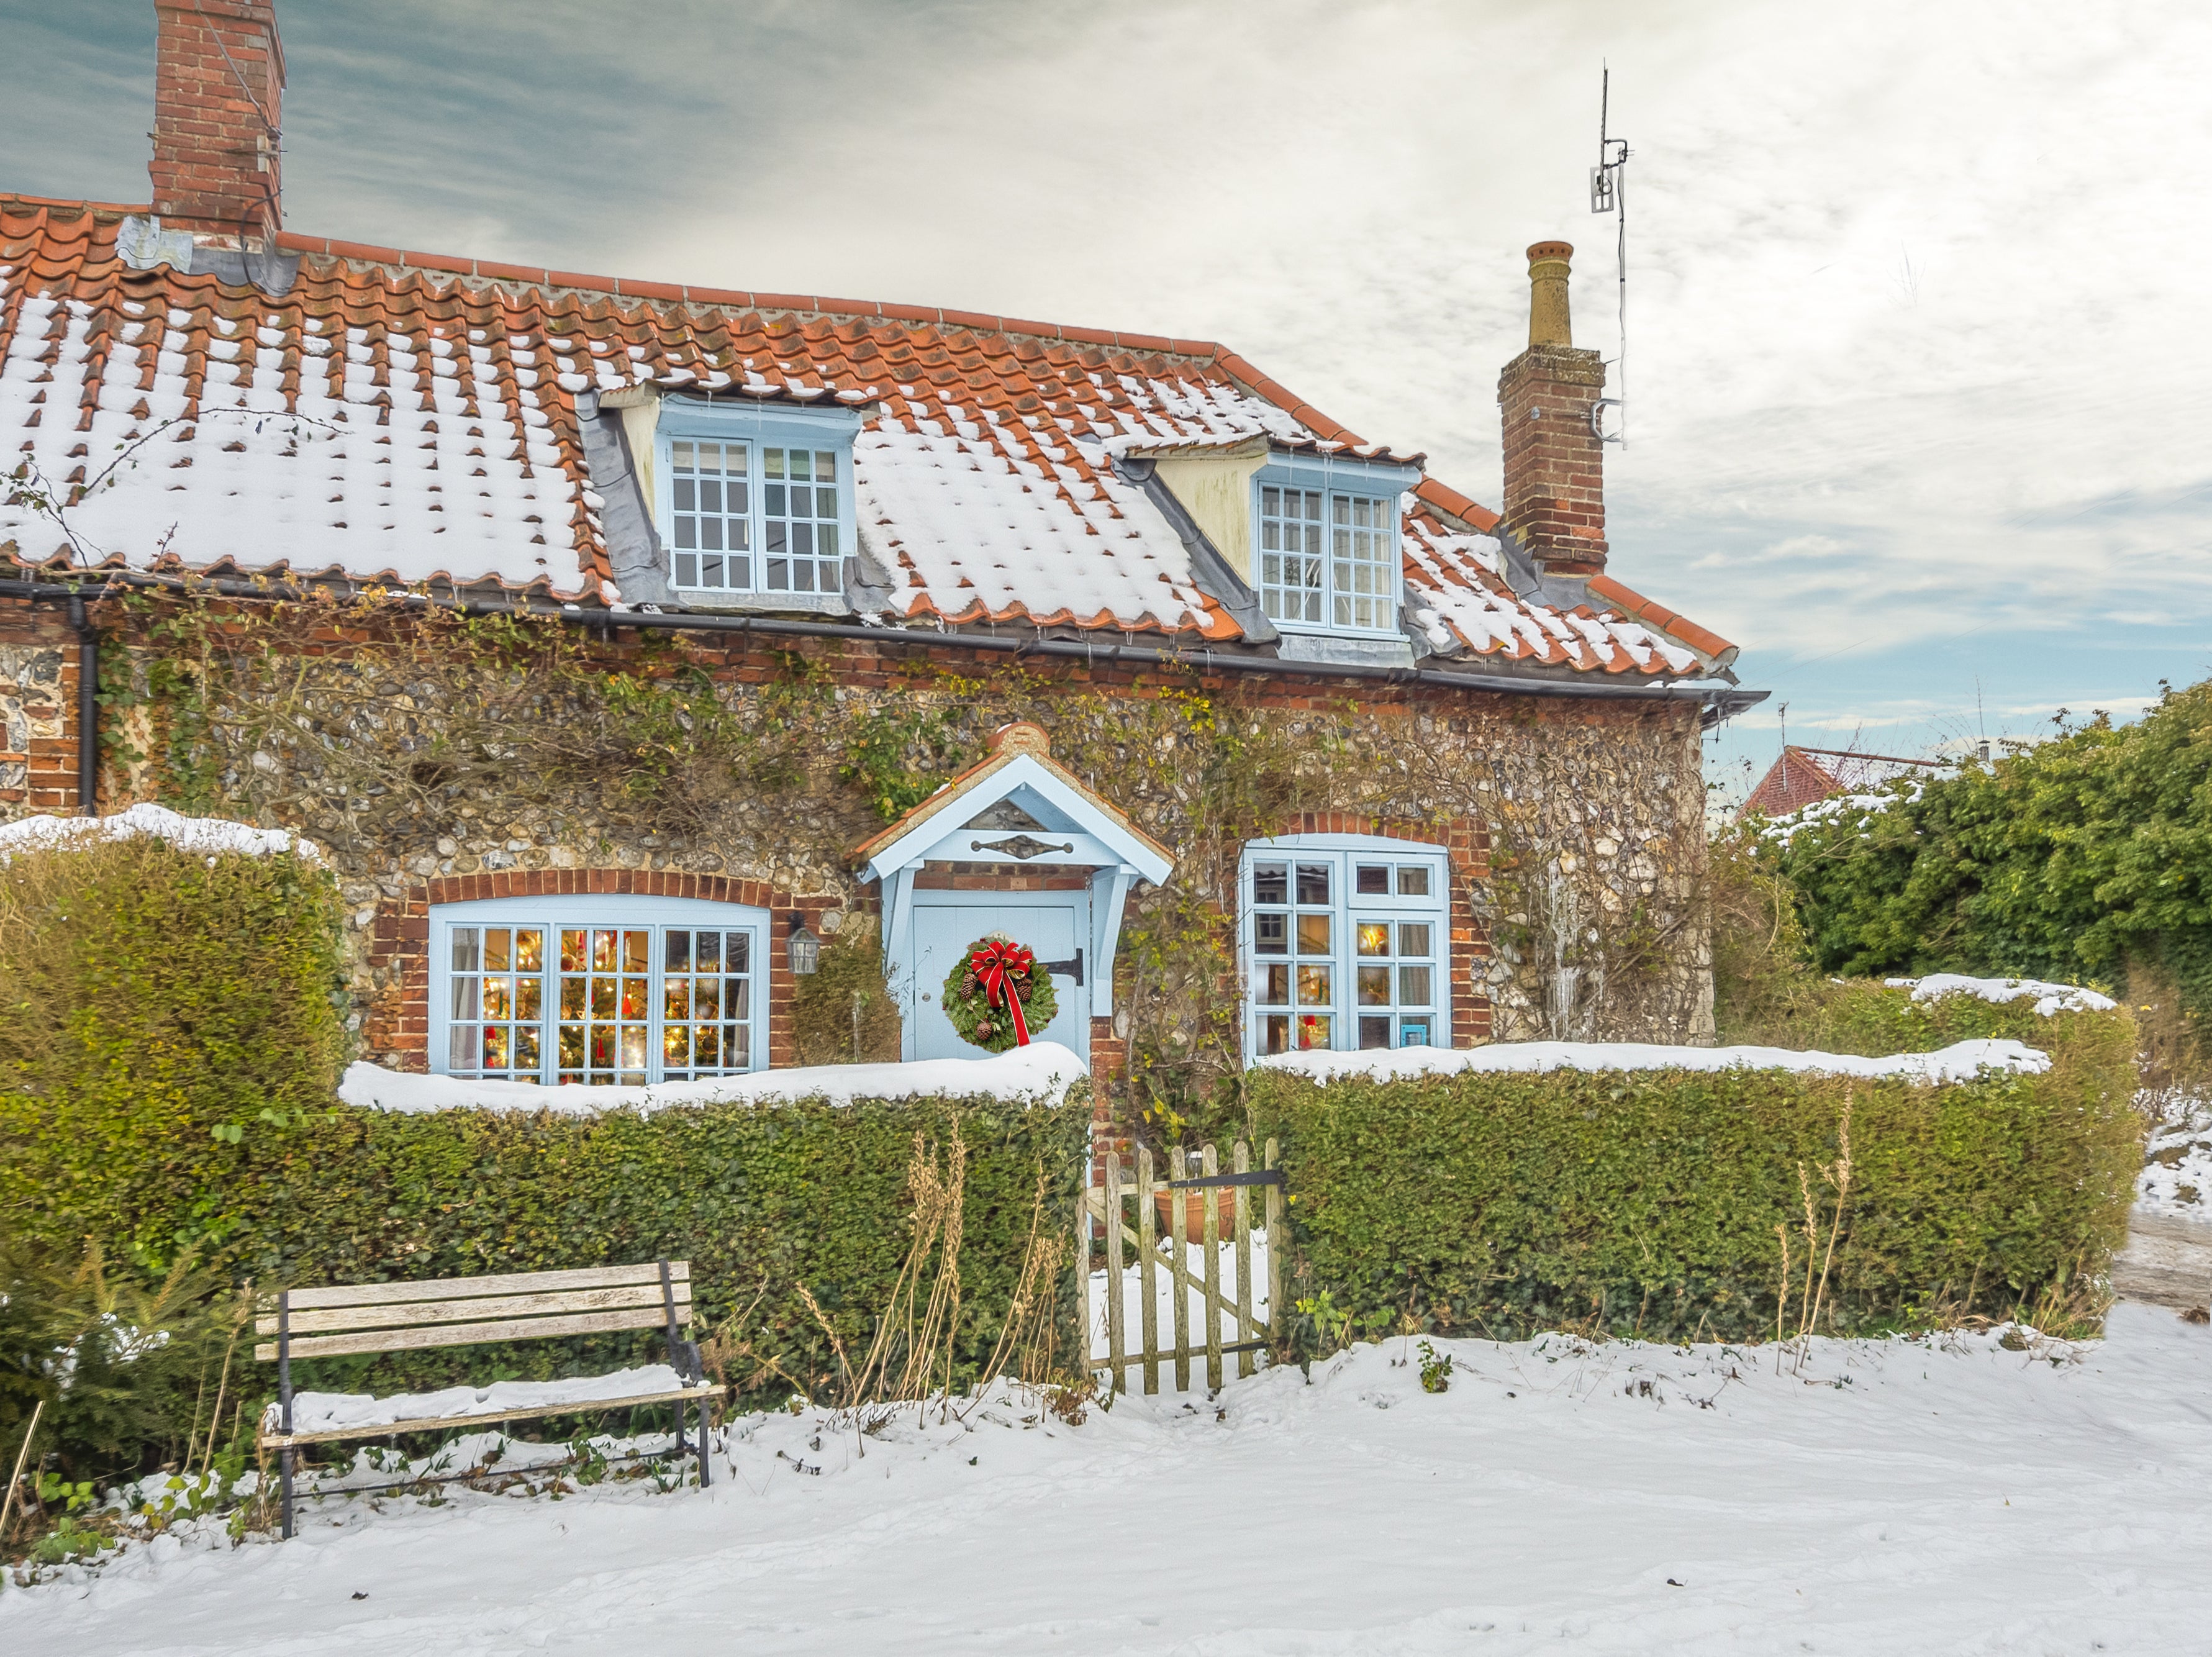 Dreaming of a white Christmas at Brooke Cottage